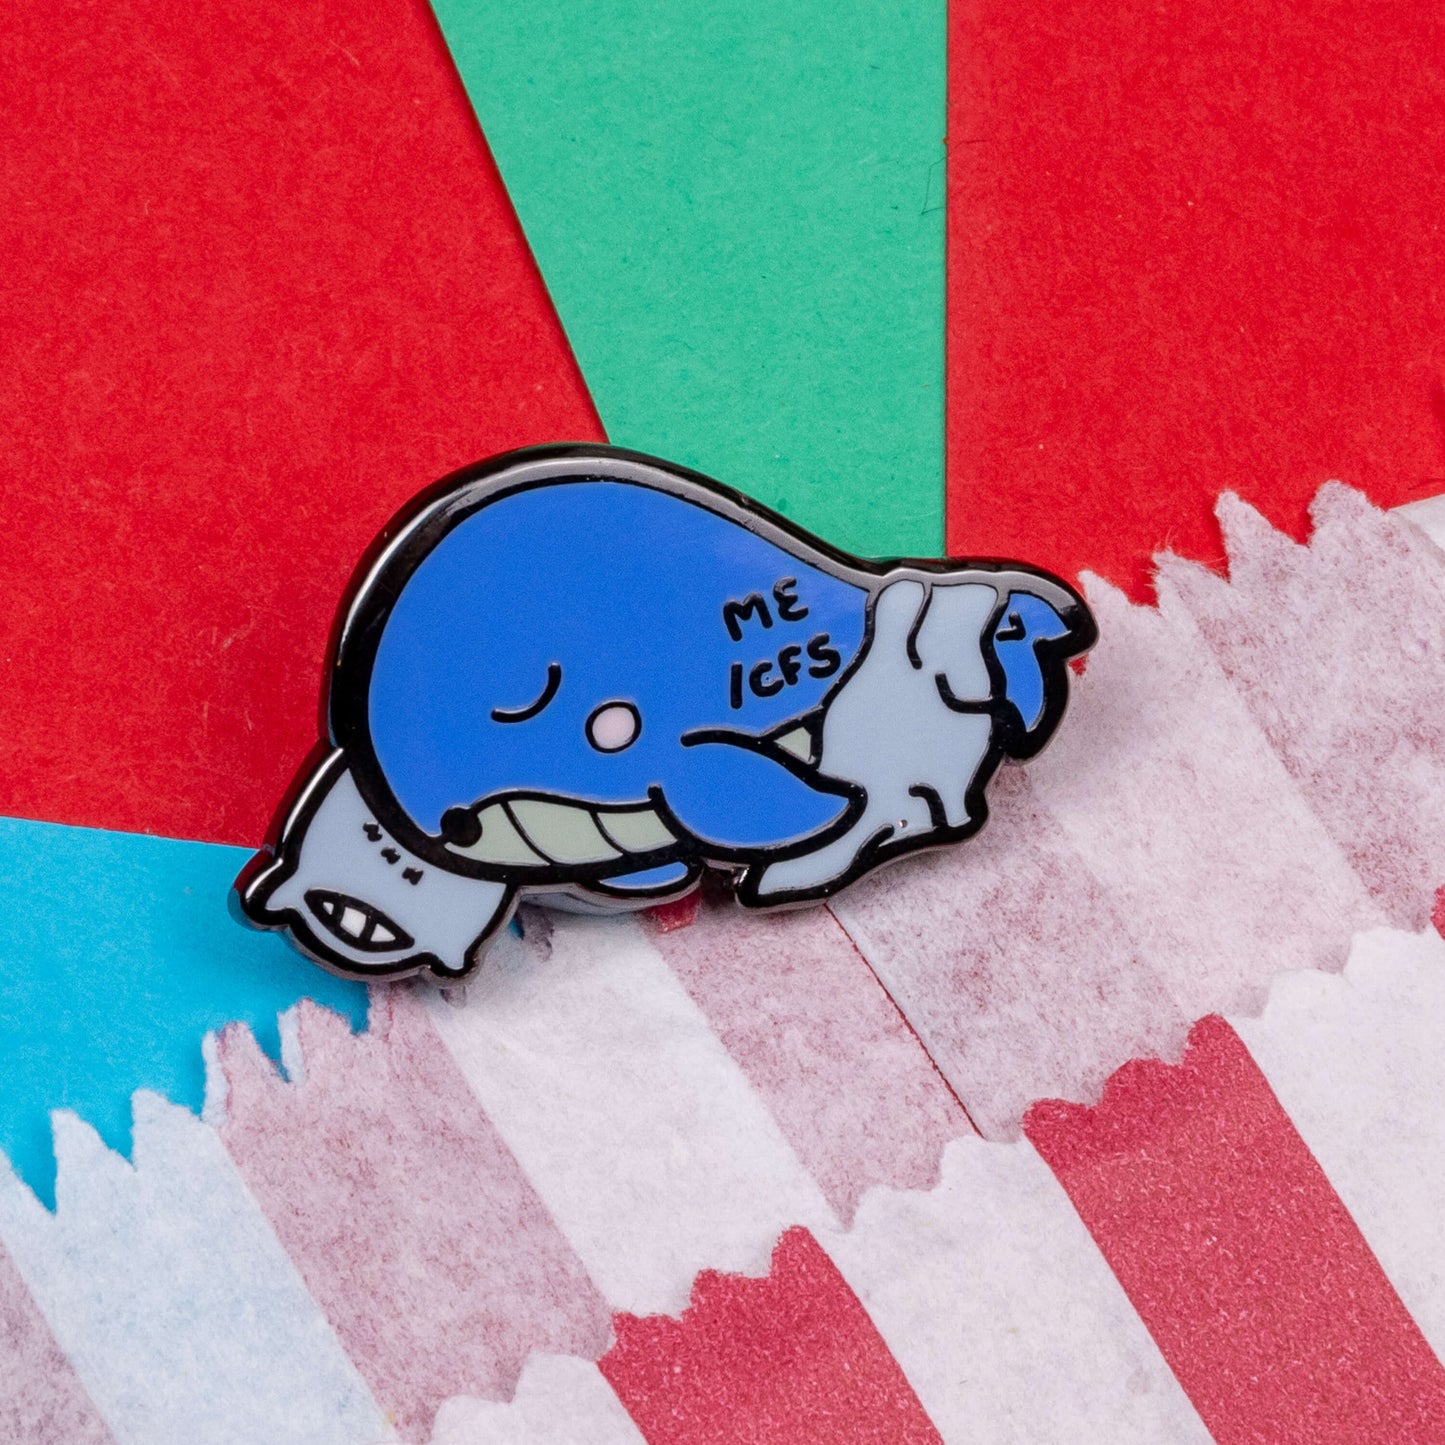 Mywhalegic Enamel Pin - Myalgic Encephalomyelitis (ME/CFS) on a red, blue and teal background next to a red and white striped paper bag. The enamel pin is a sleeping blue whale laying on a white pillow with a white blanket over it and ME/CFS written on its back. The enamel pin is designed to raise awareness for Myalgic encephalomyelitis or chronic fatigue syndrome